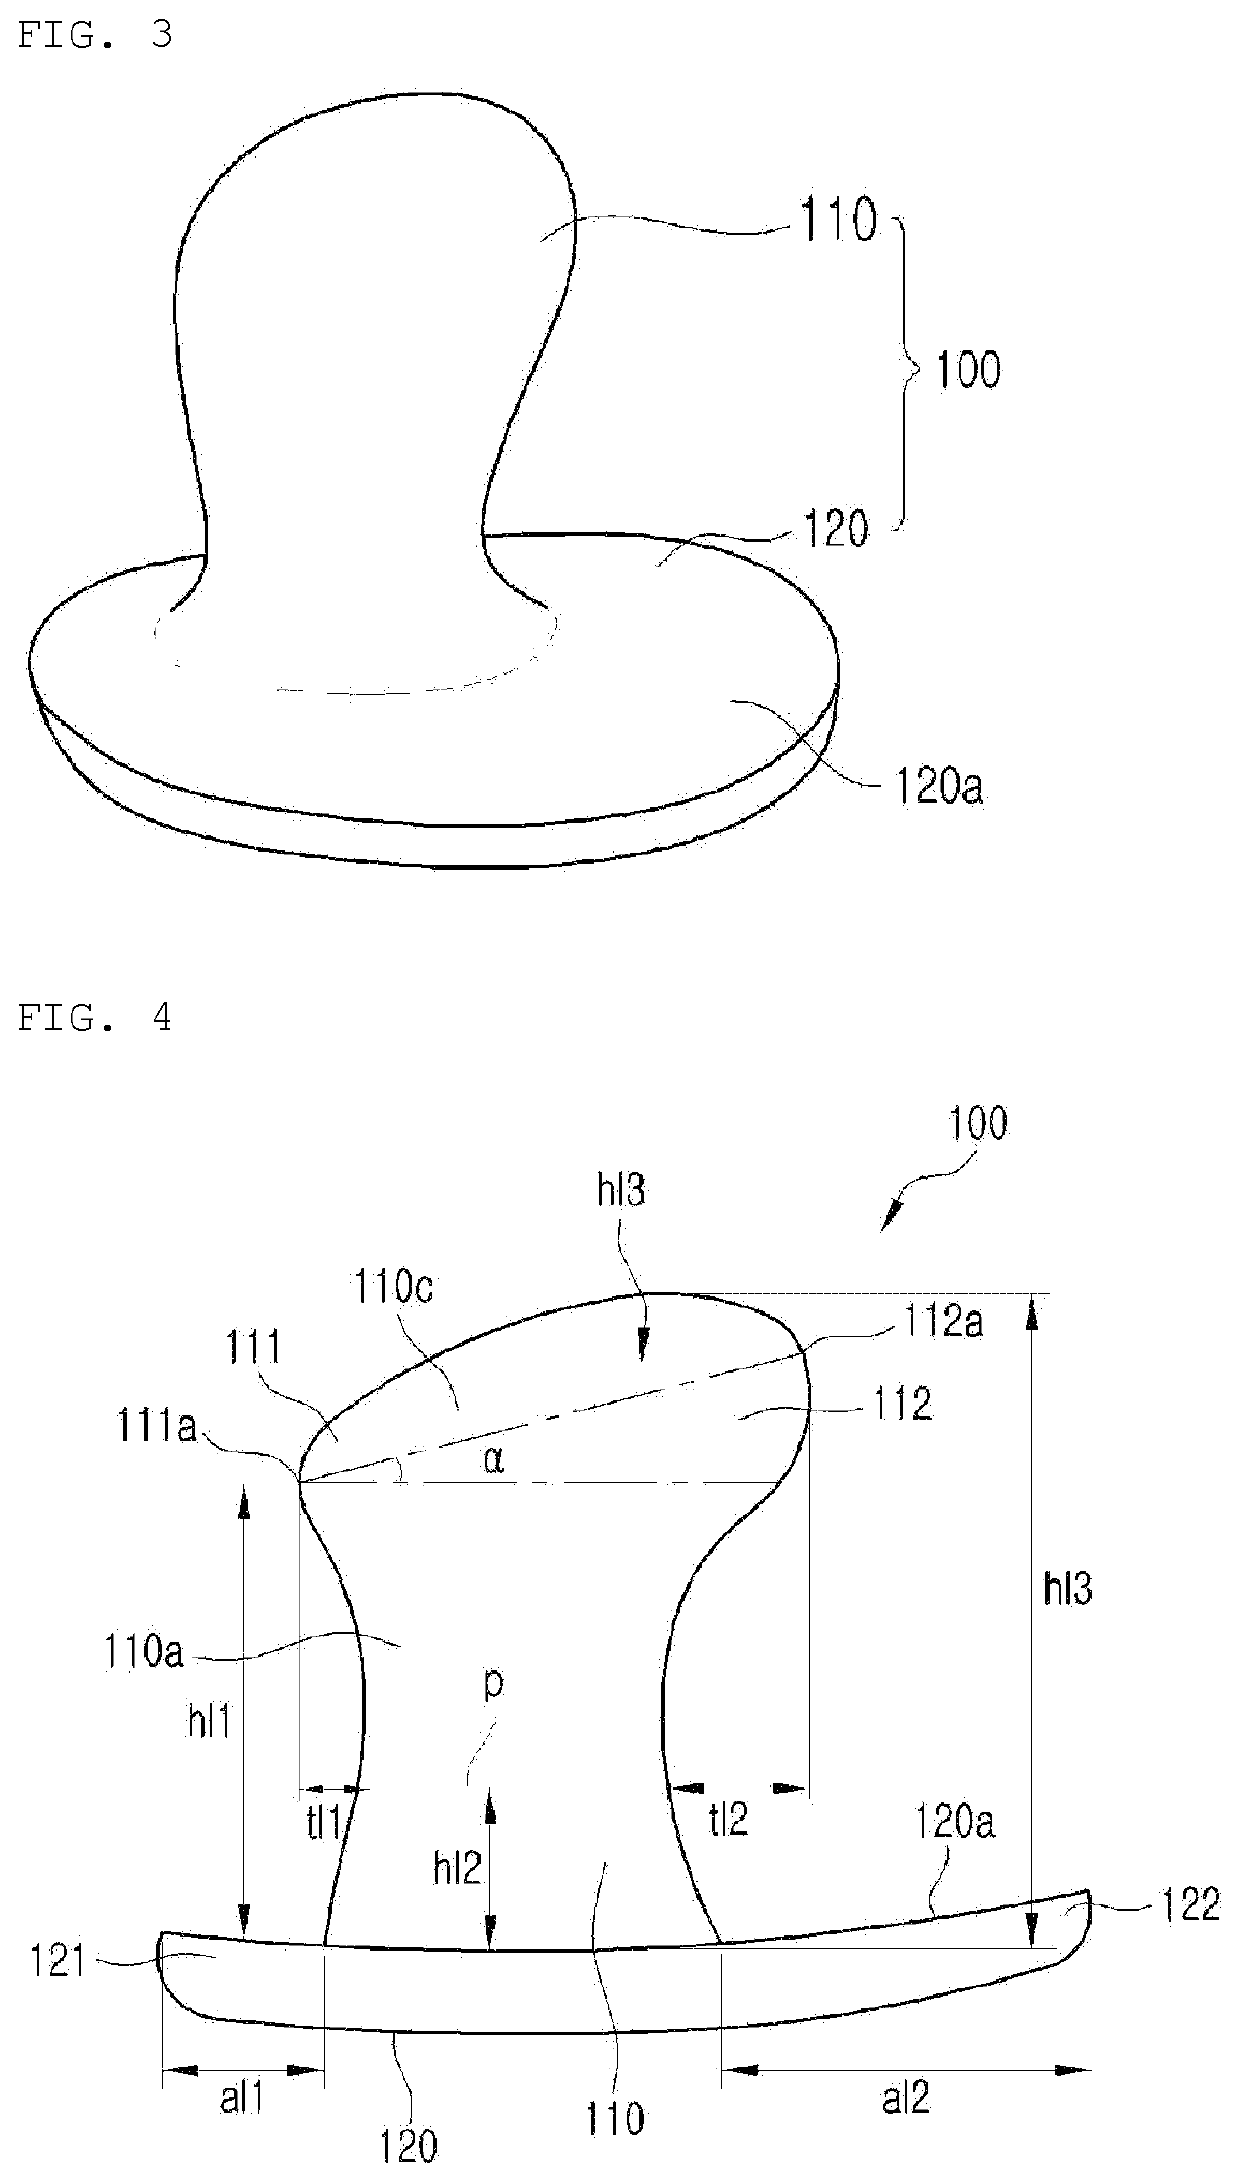 Apparatus for Treating Urinary Incontinence, and Panties Having Same